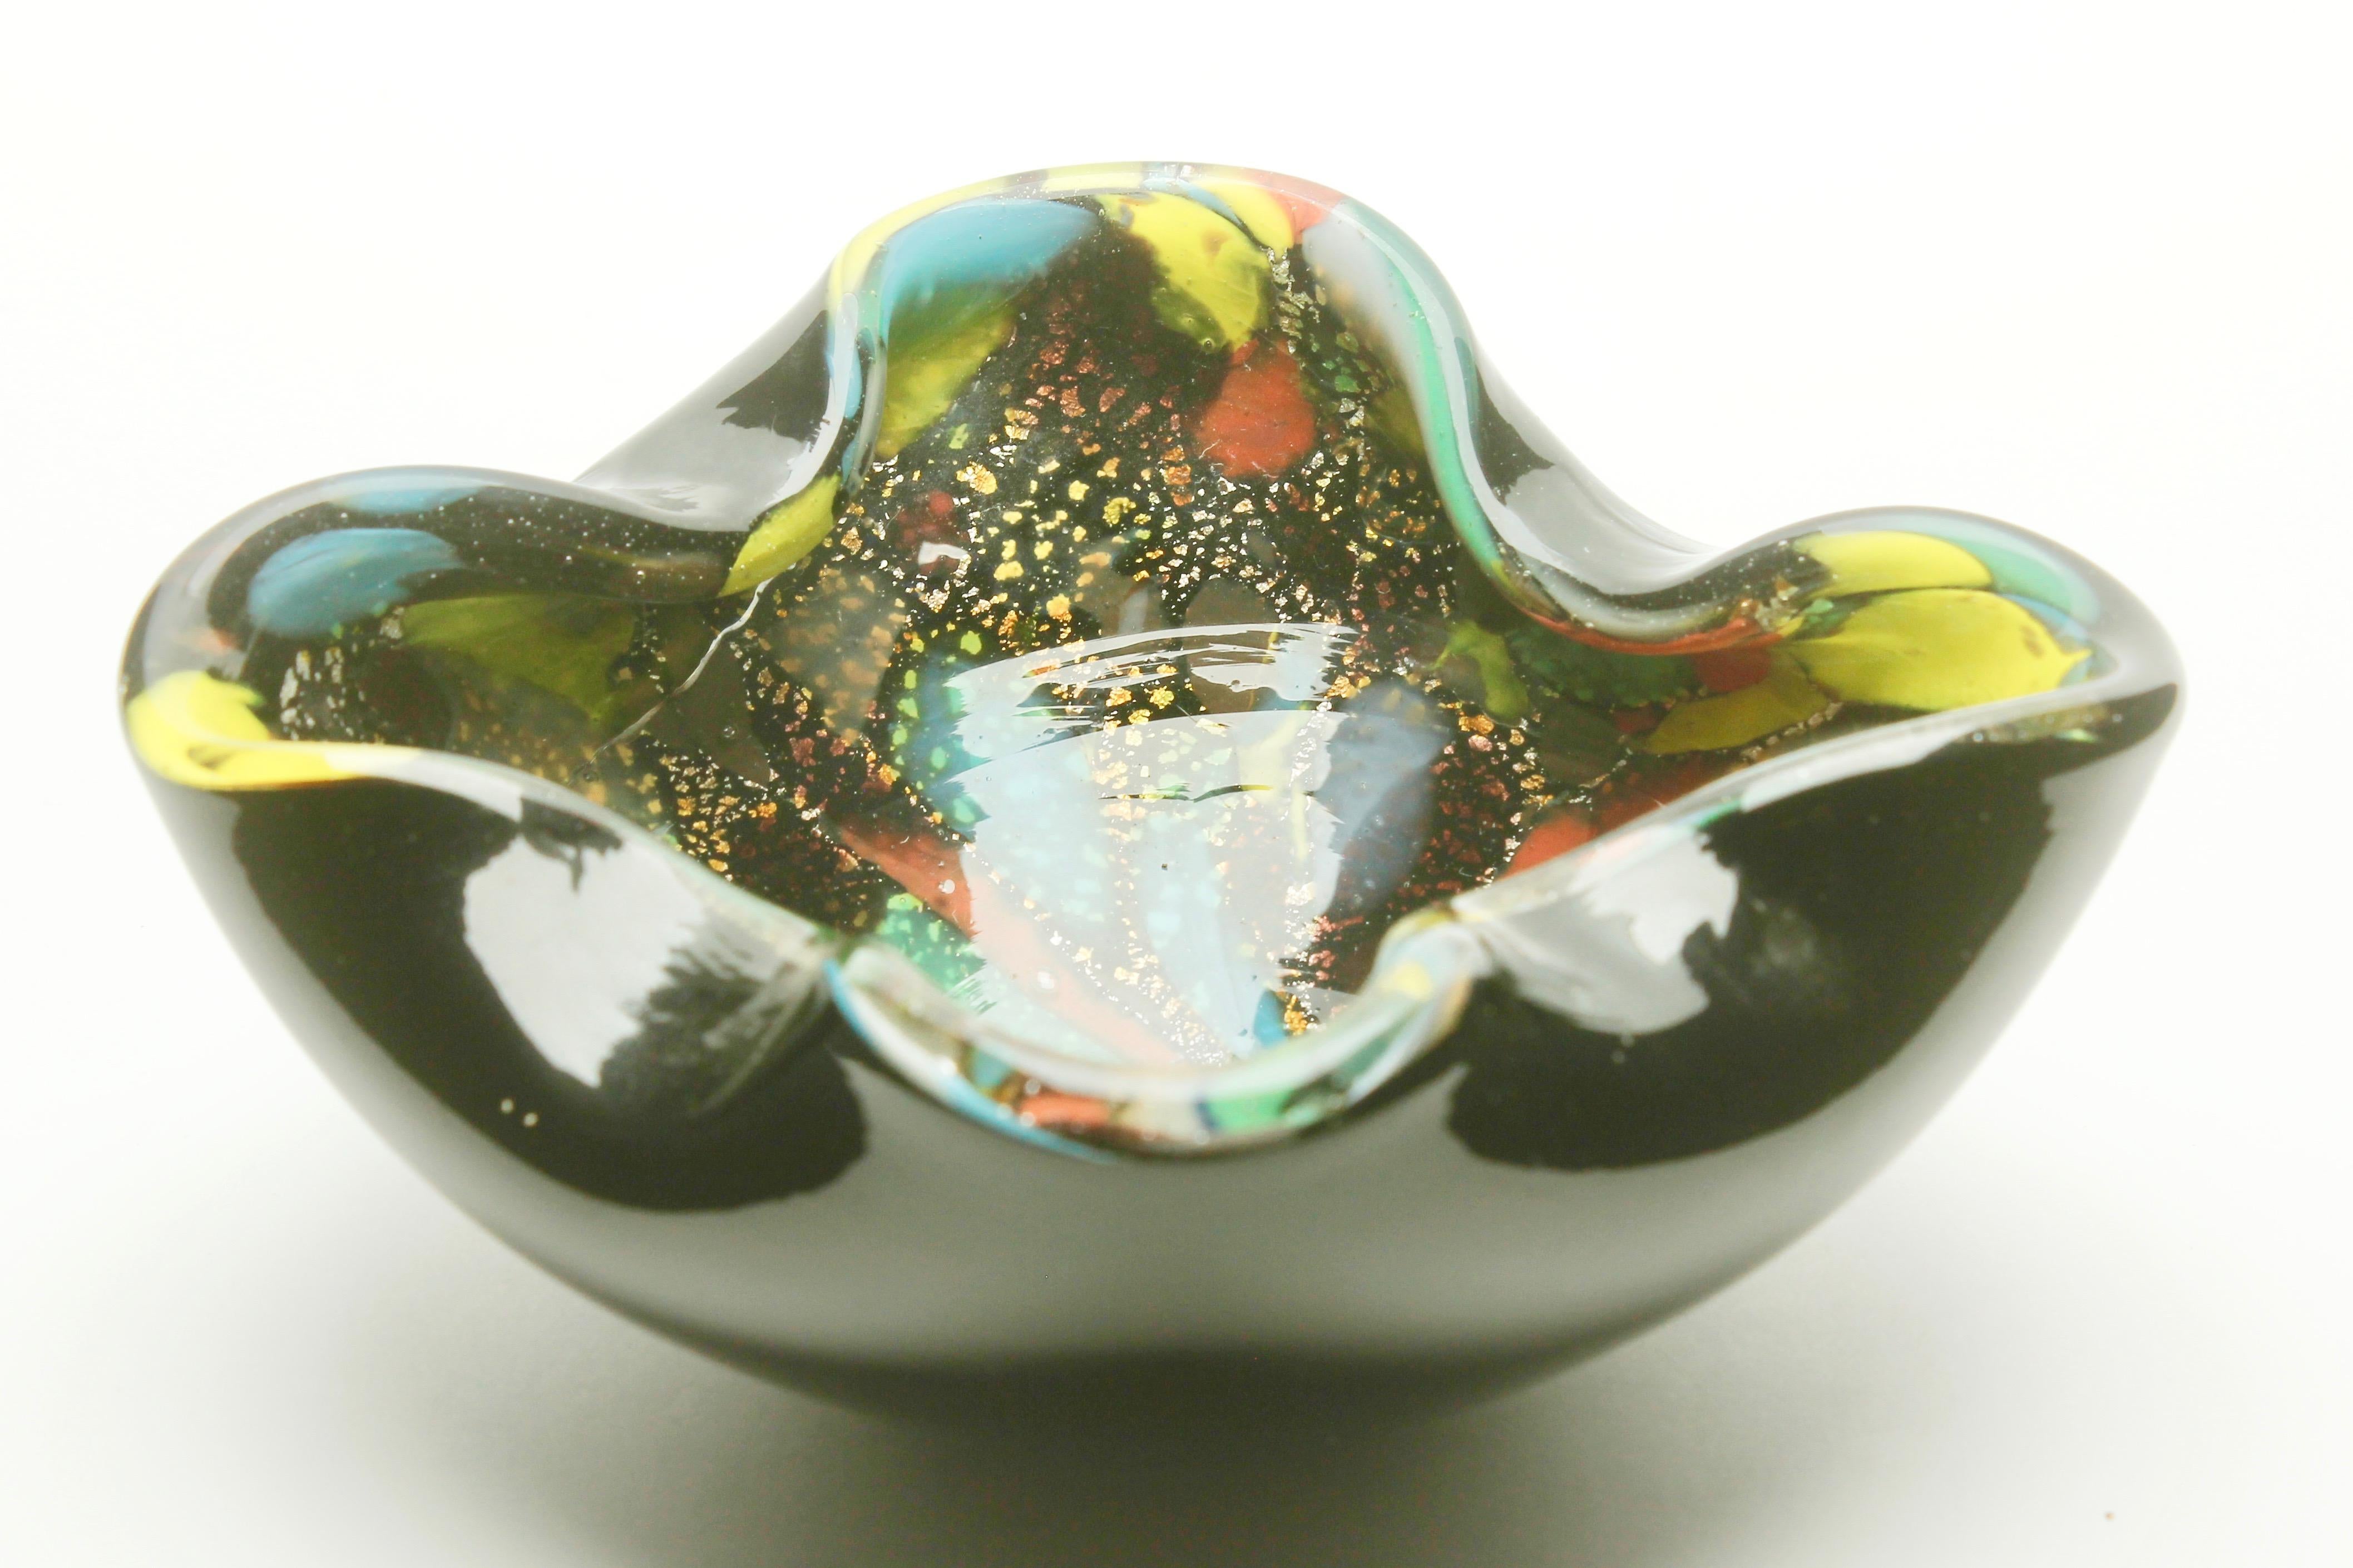 Mid-Century Modern Murano Art Glass Bowl Black Shell, Metals and Bright Colors, Attributed to AVEM